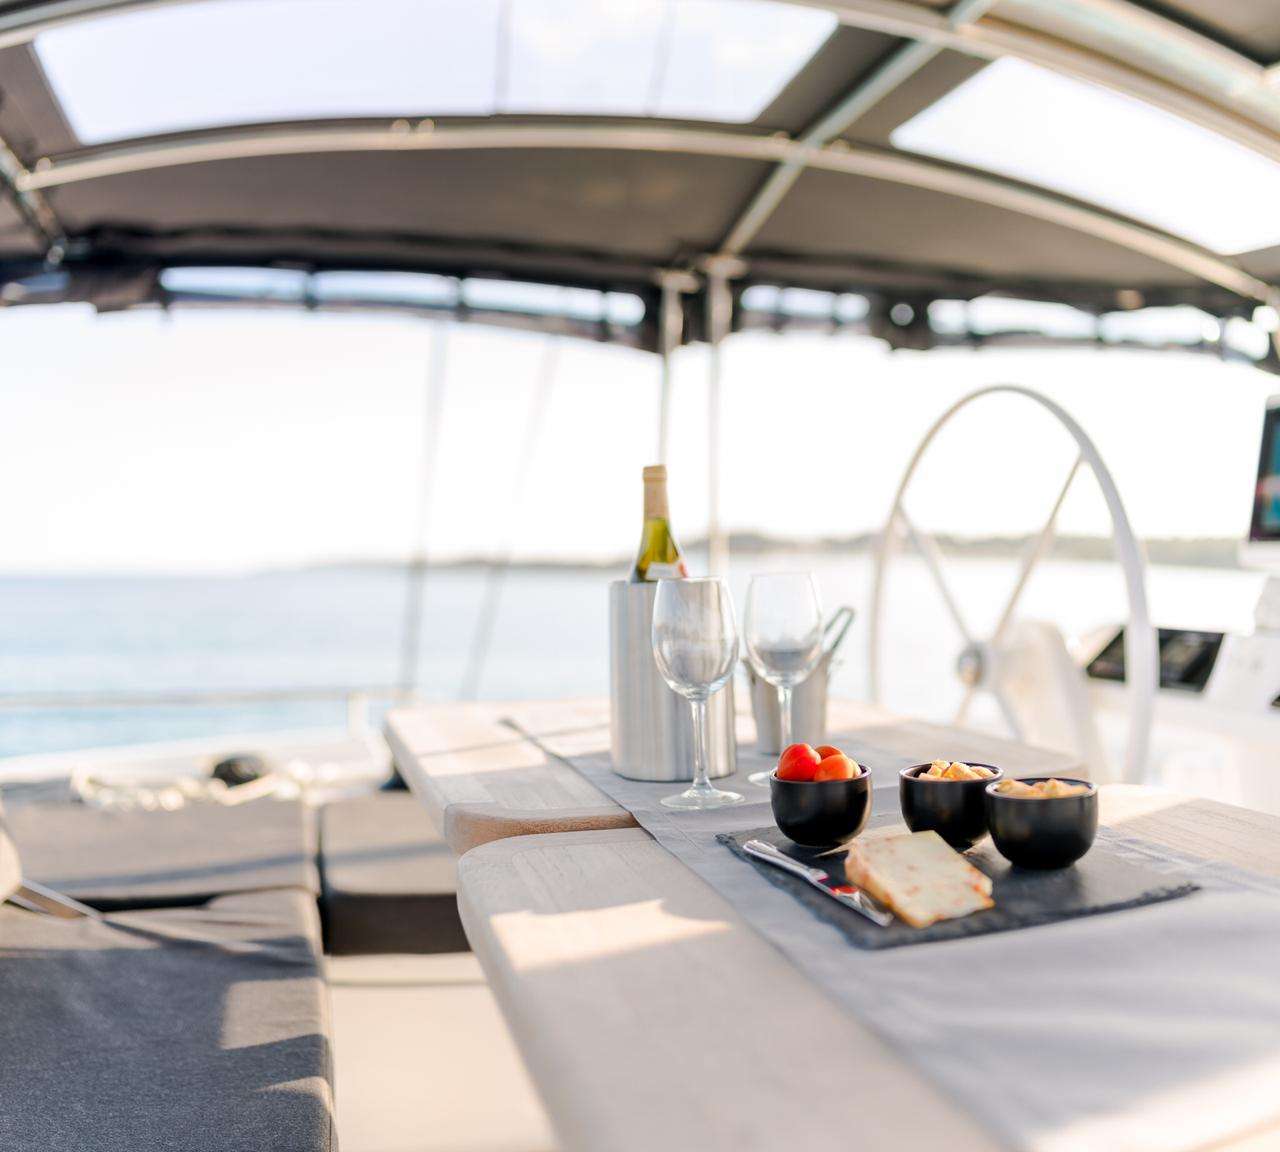 Best Wine & Breakfast yacht charter - High Point Yachting